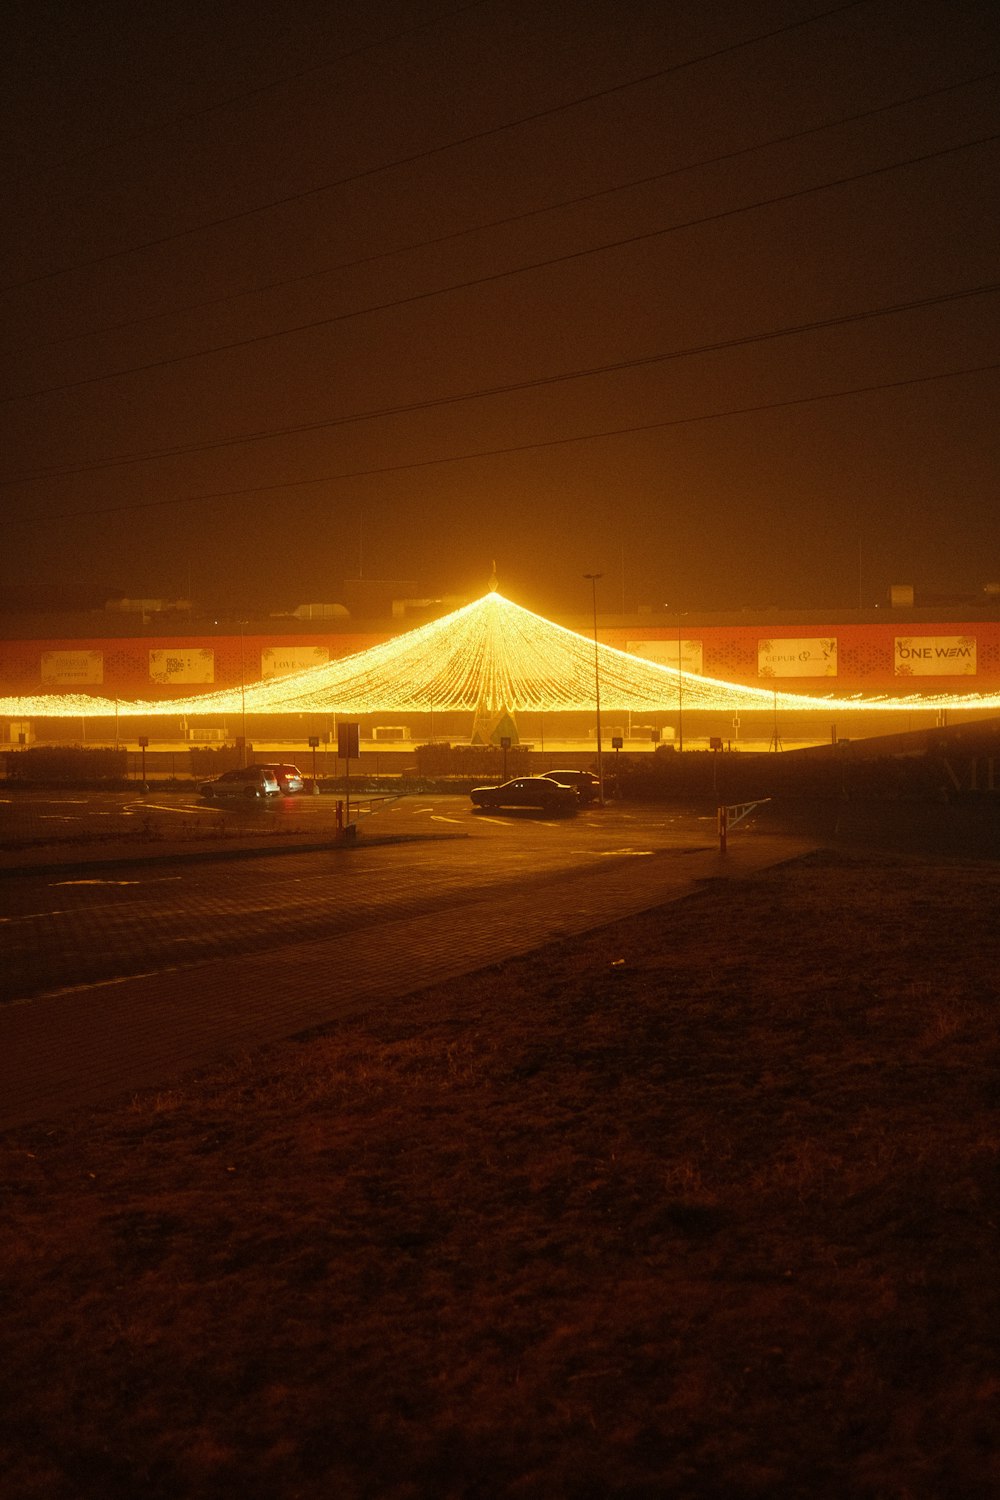 a large circus tent lit up at night